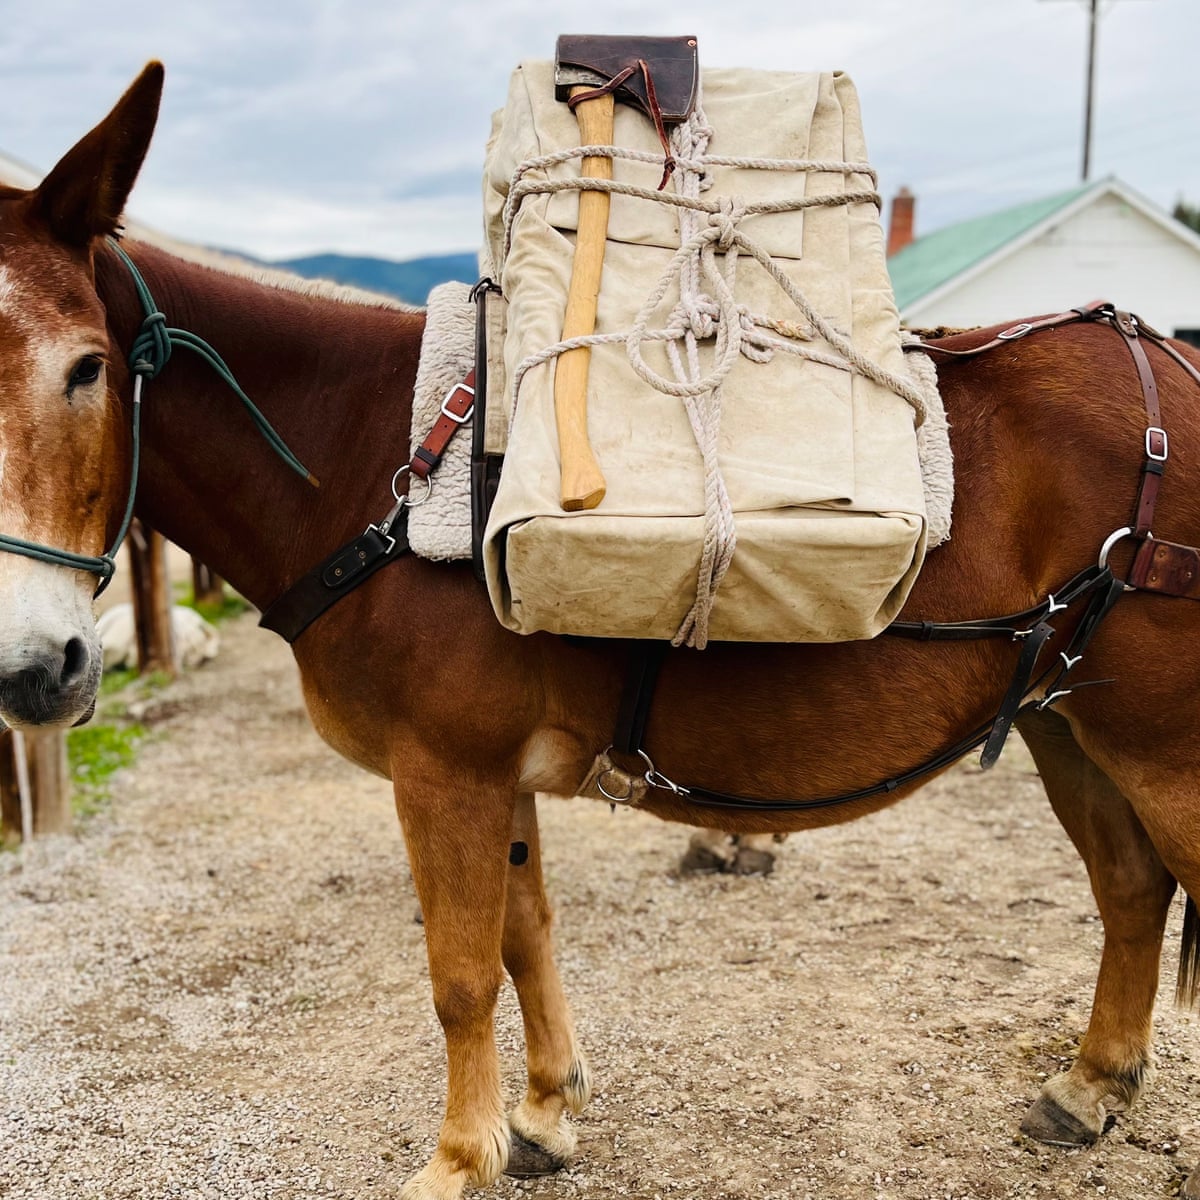 Keeping it wild: how mules help preserve the last untamed places